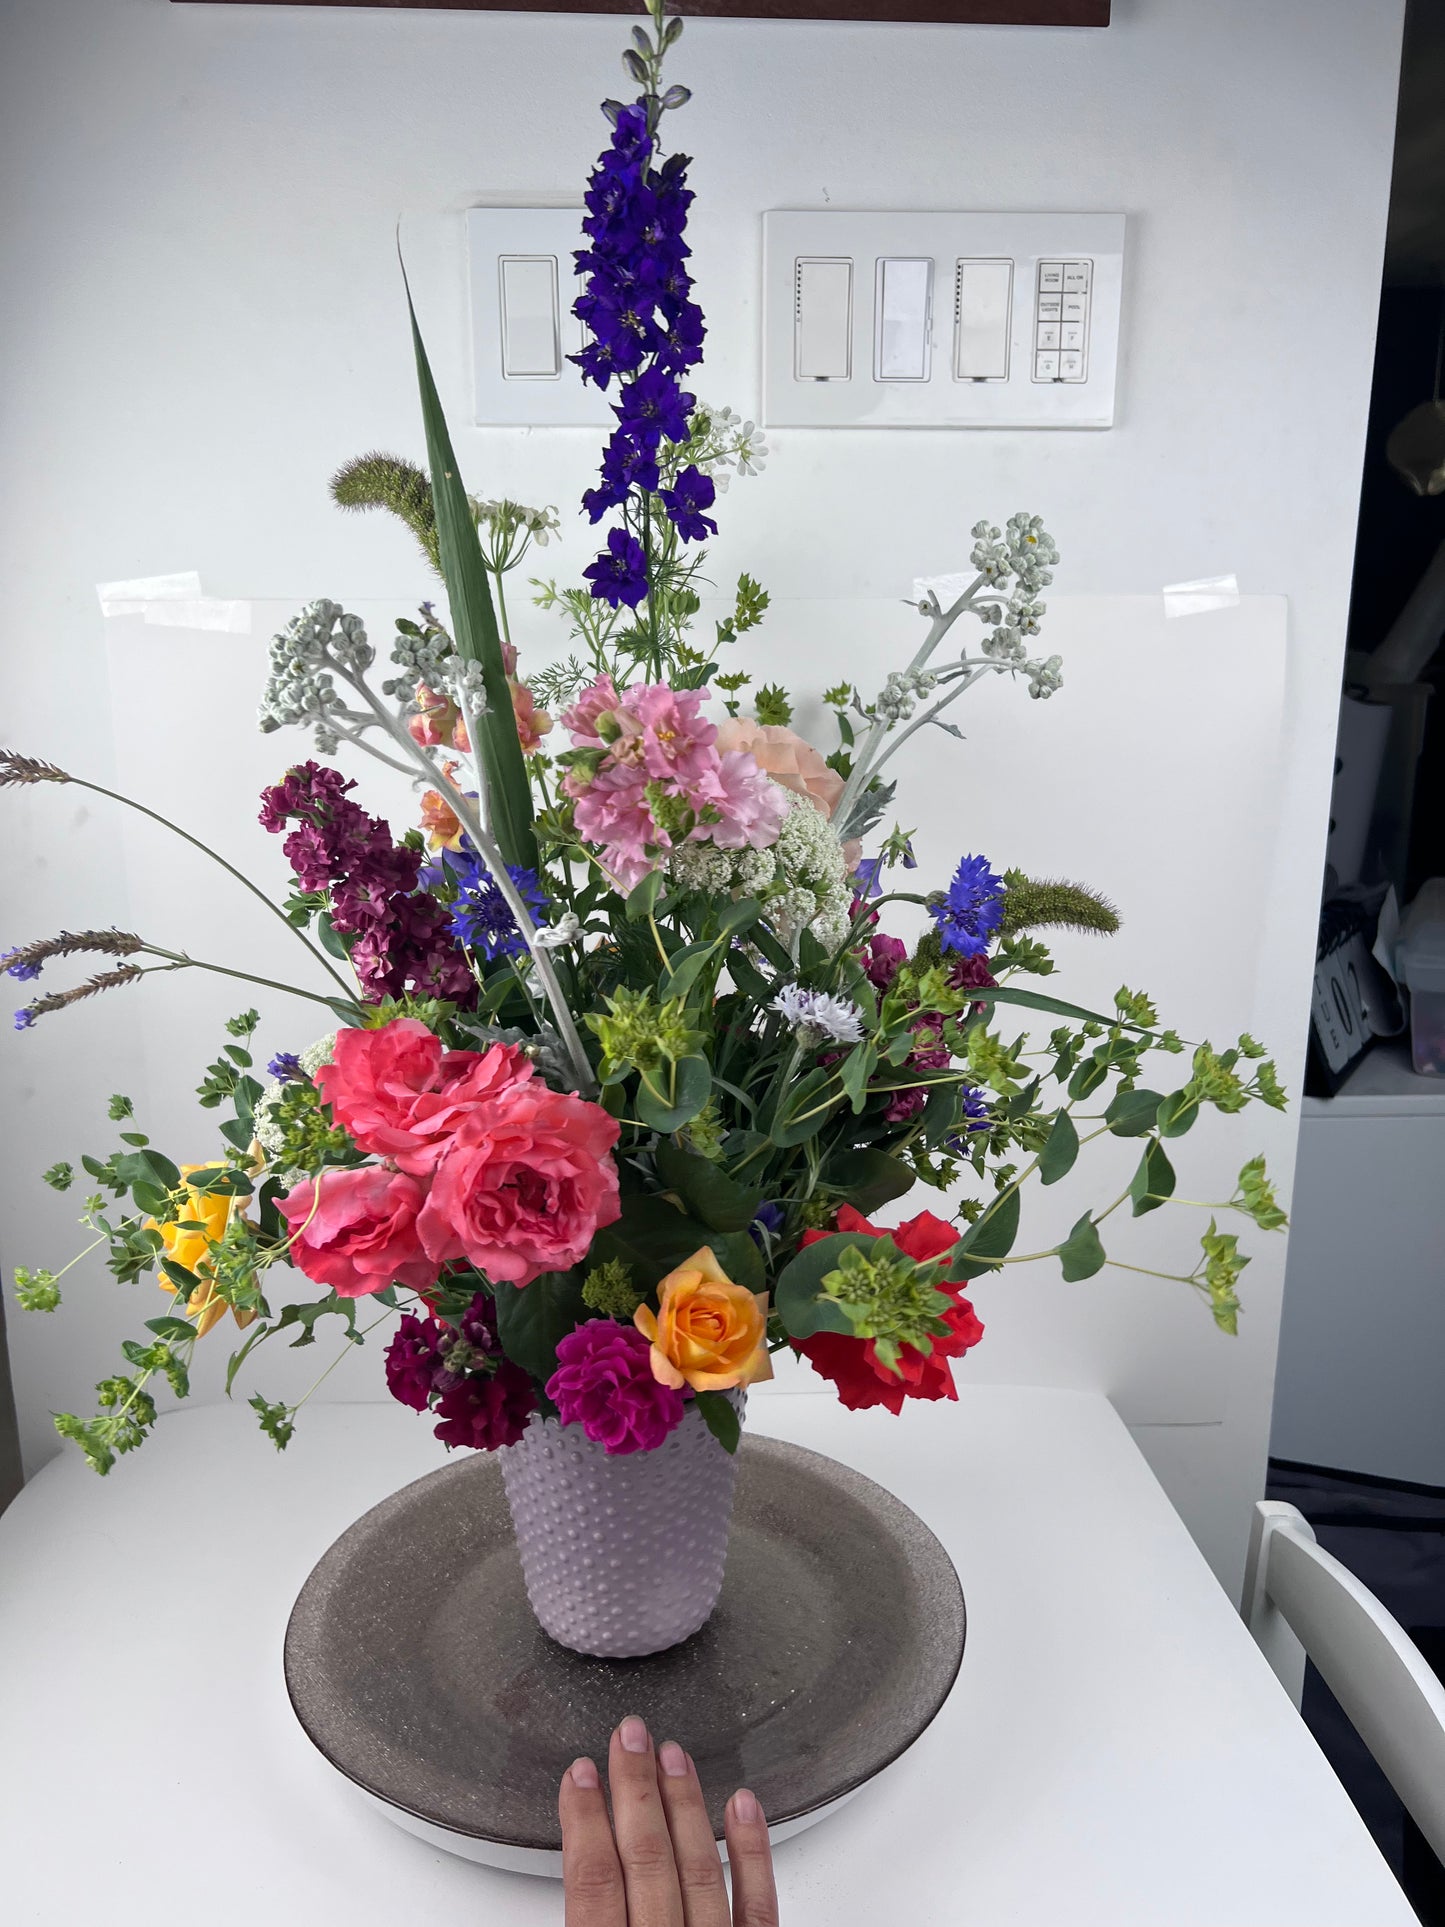 an example of an "extra" sized bouquet with roses, larkspur, bachelor buttons, bupleurum, stock, dusty miller, carrot flower